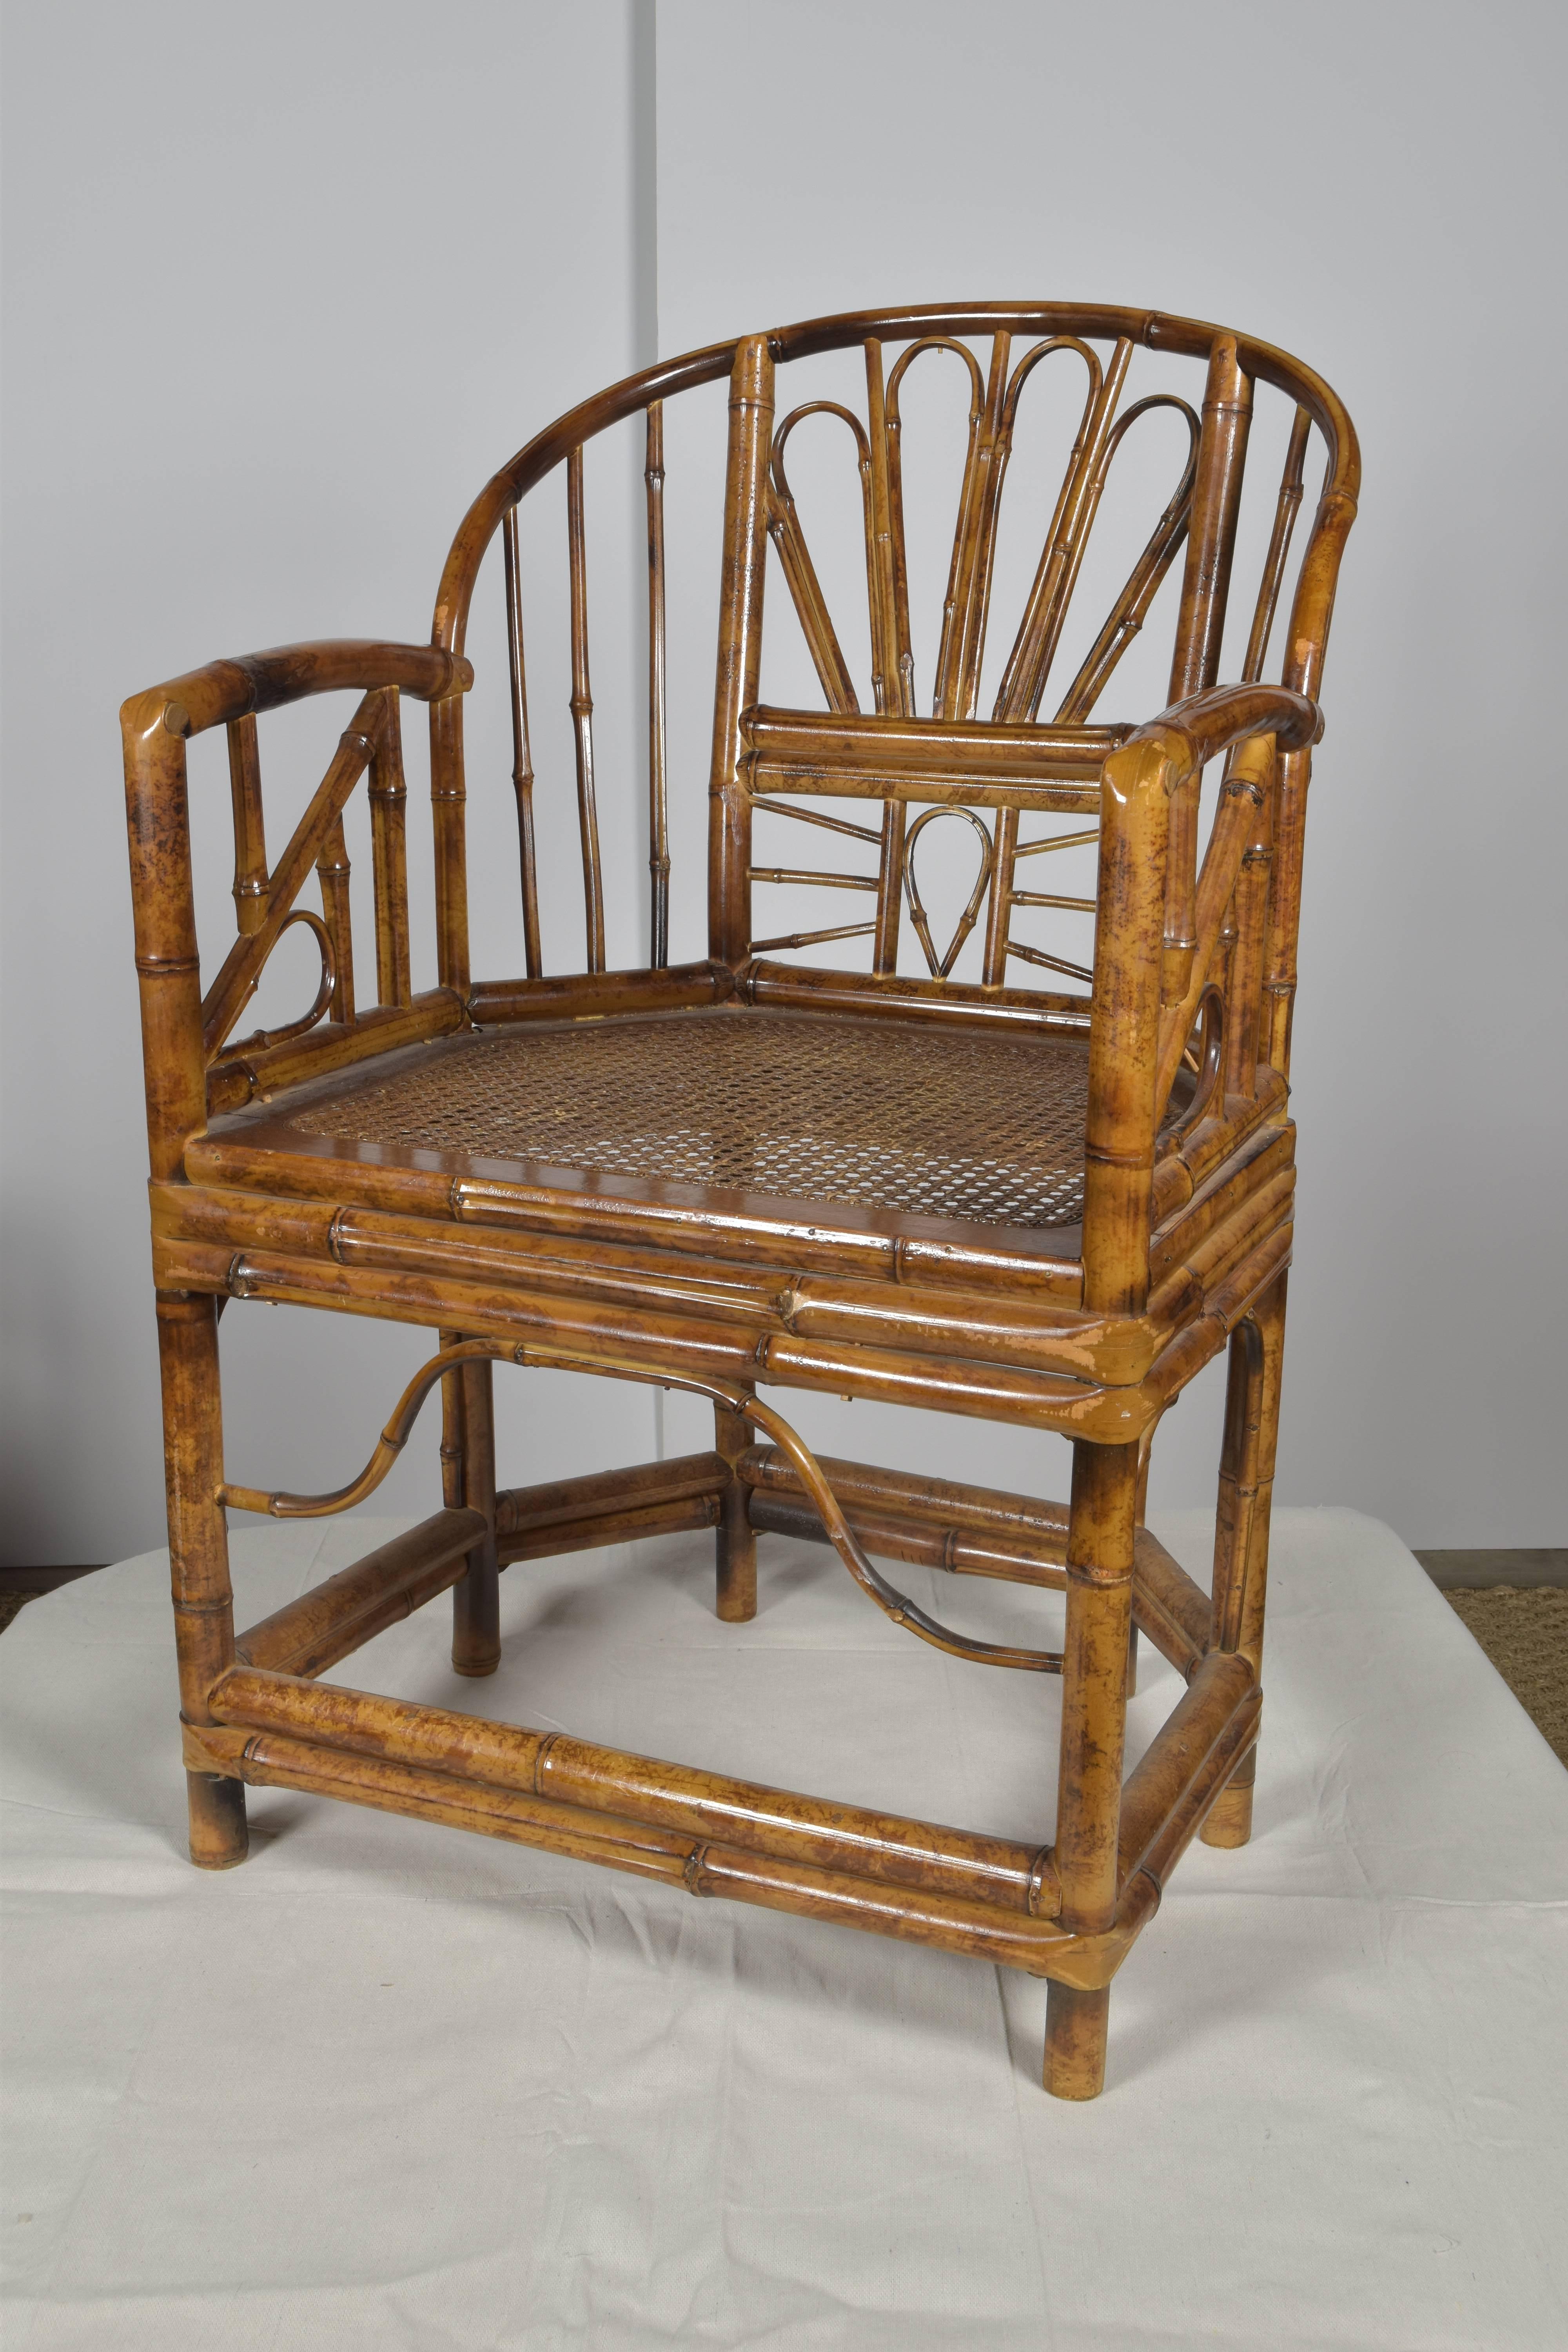 Pair of tortoise bamboo side chairs with original caned seats in the Chinese style.